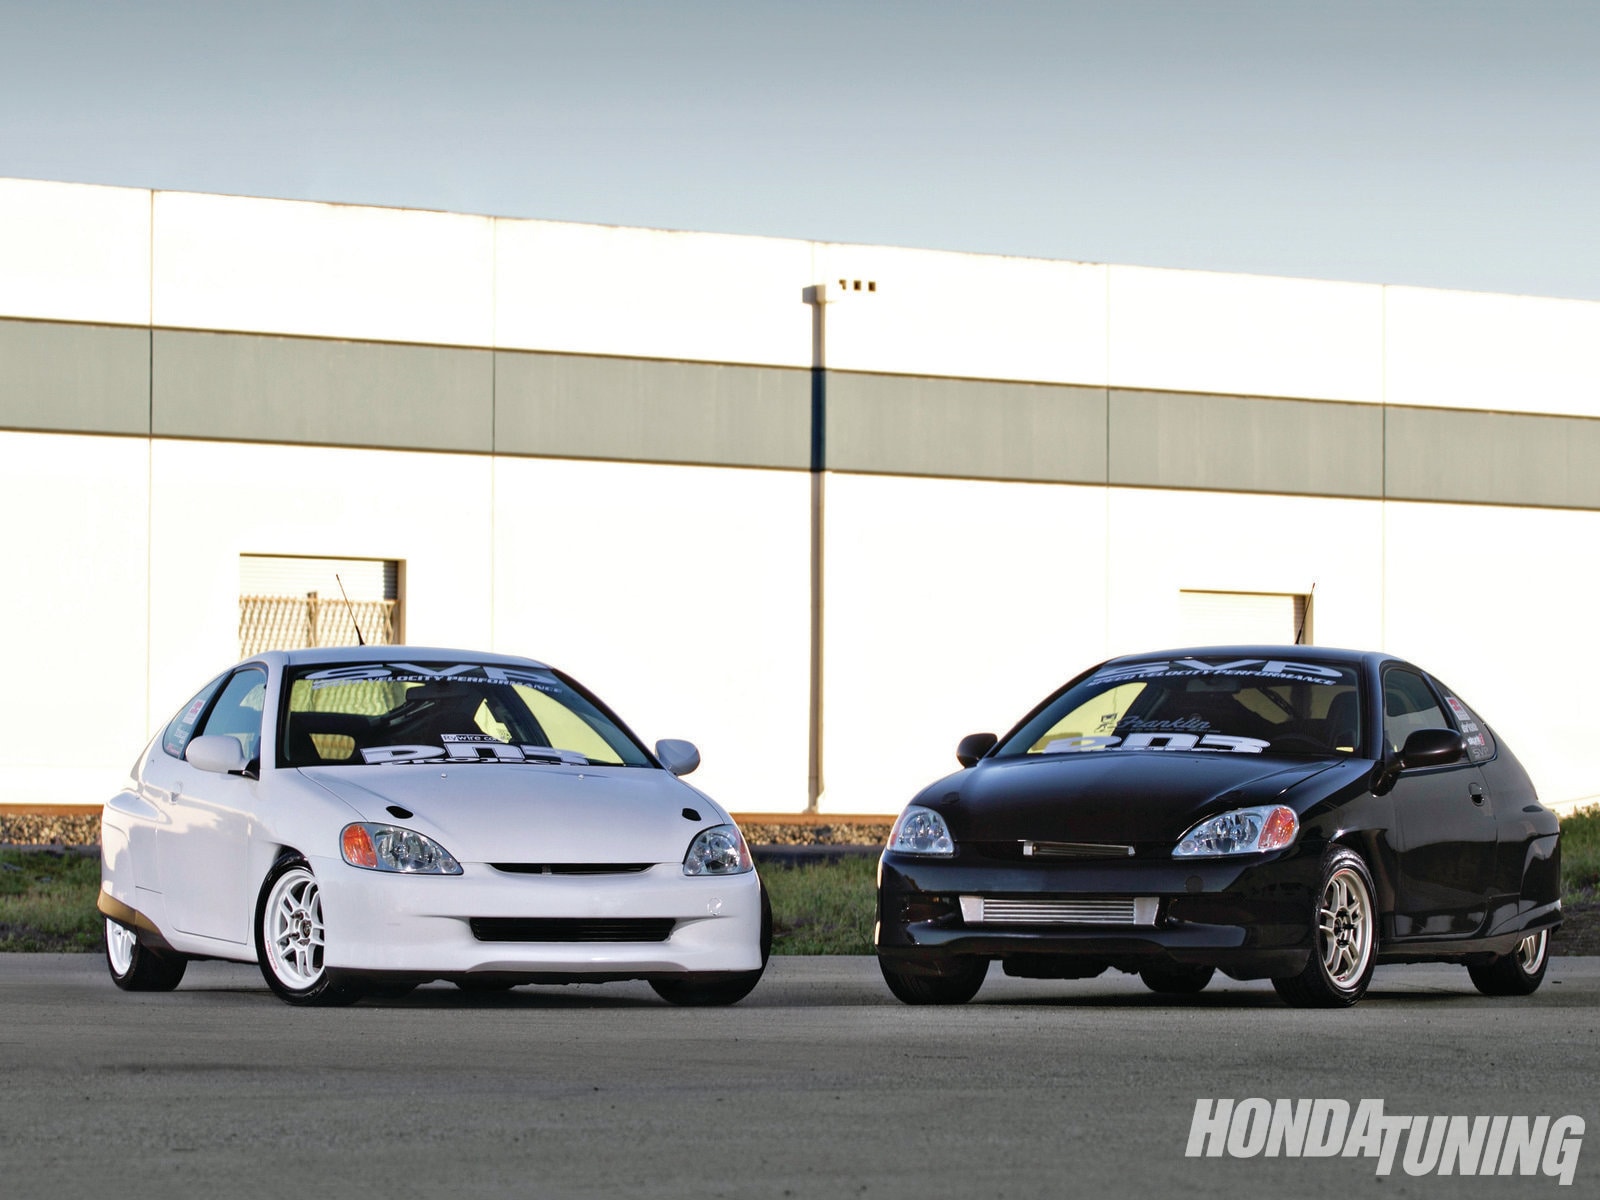 2000 Honda Insights - Two Fast, Two Serious